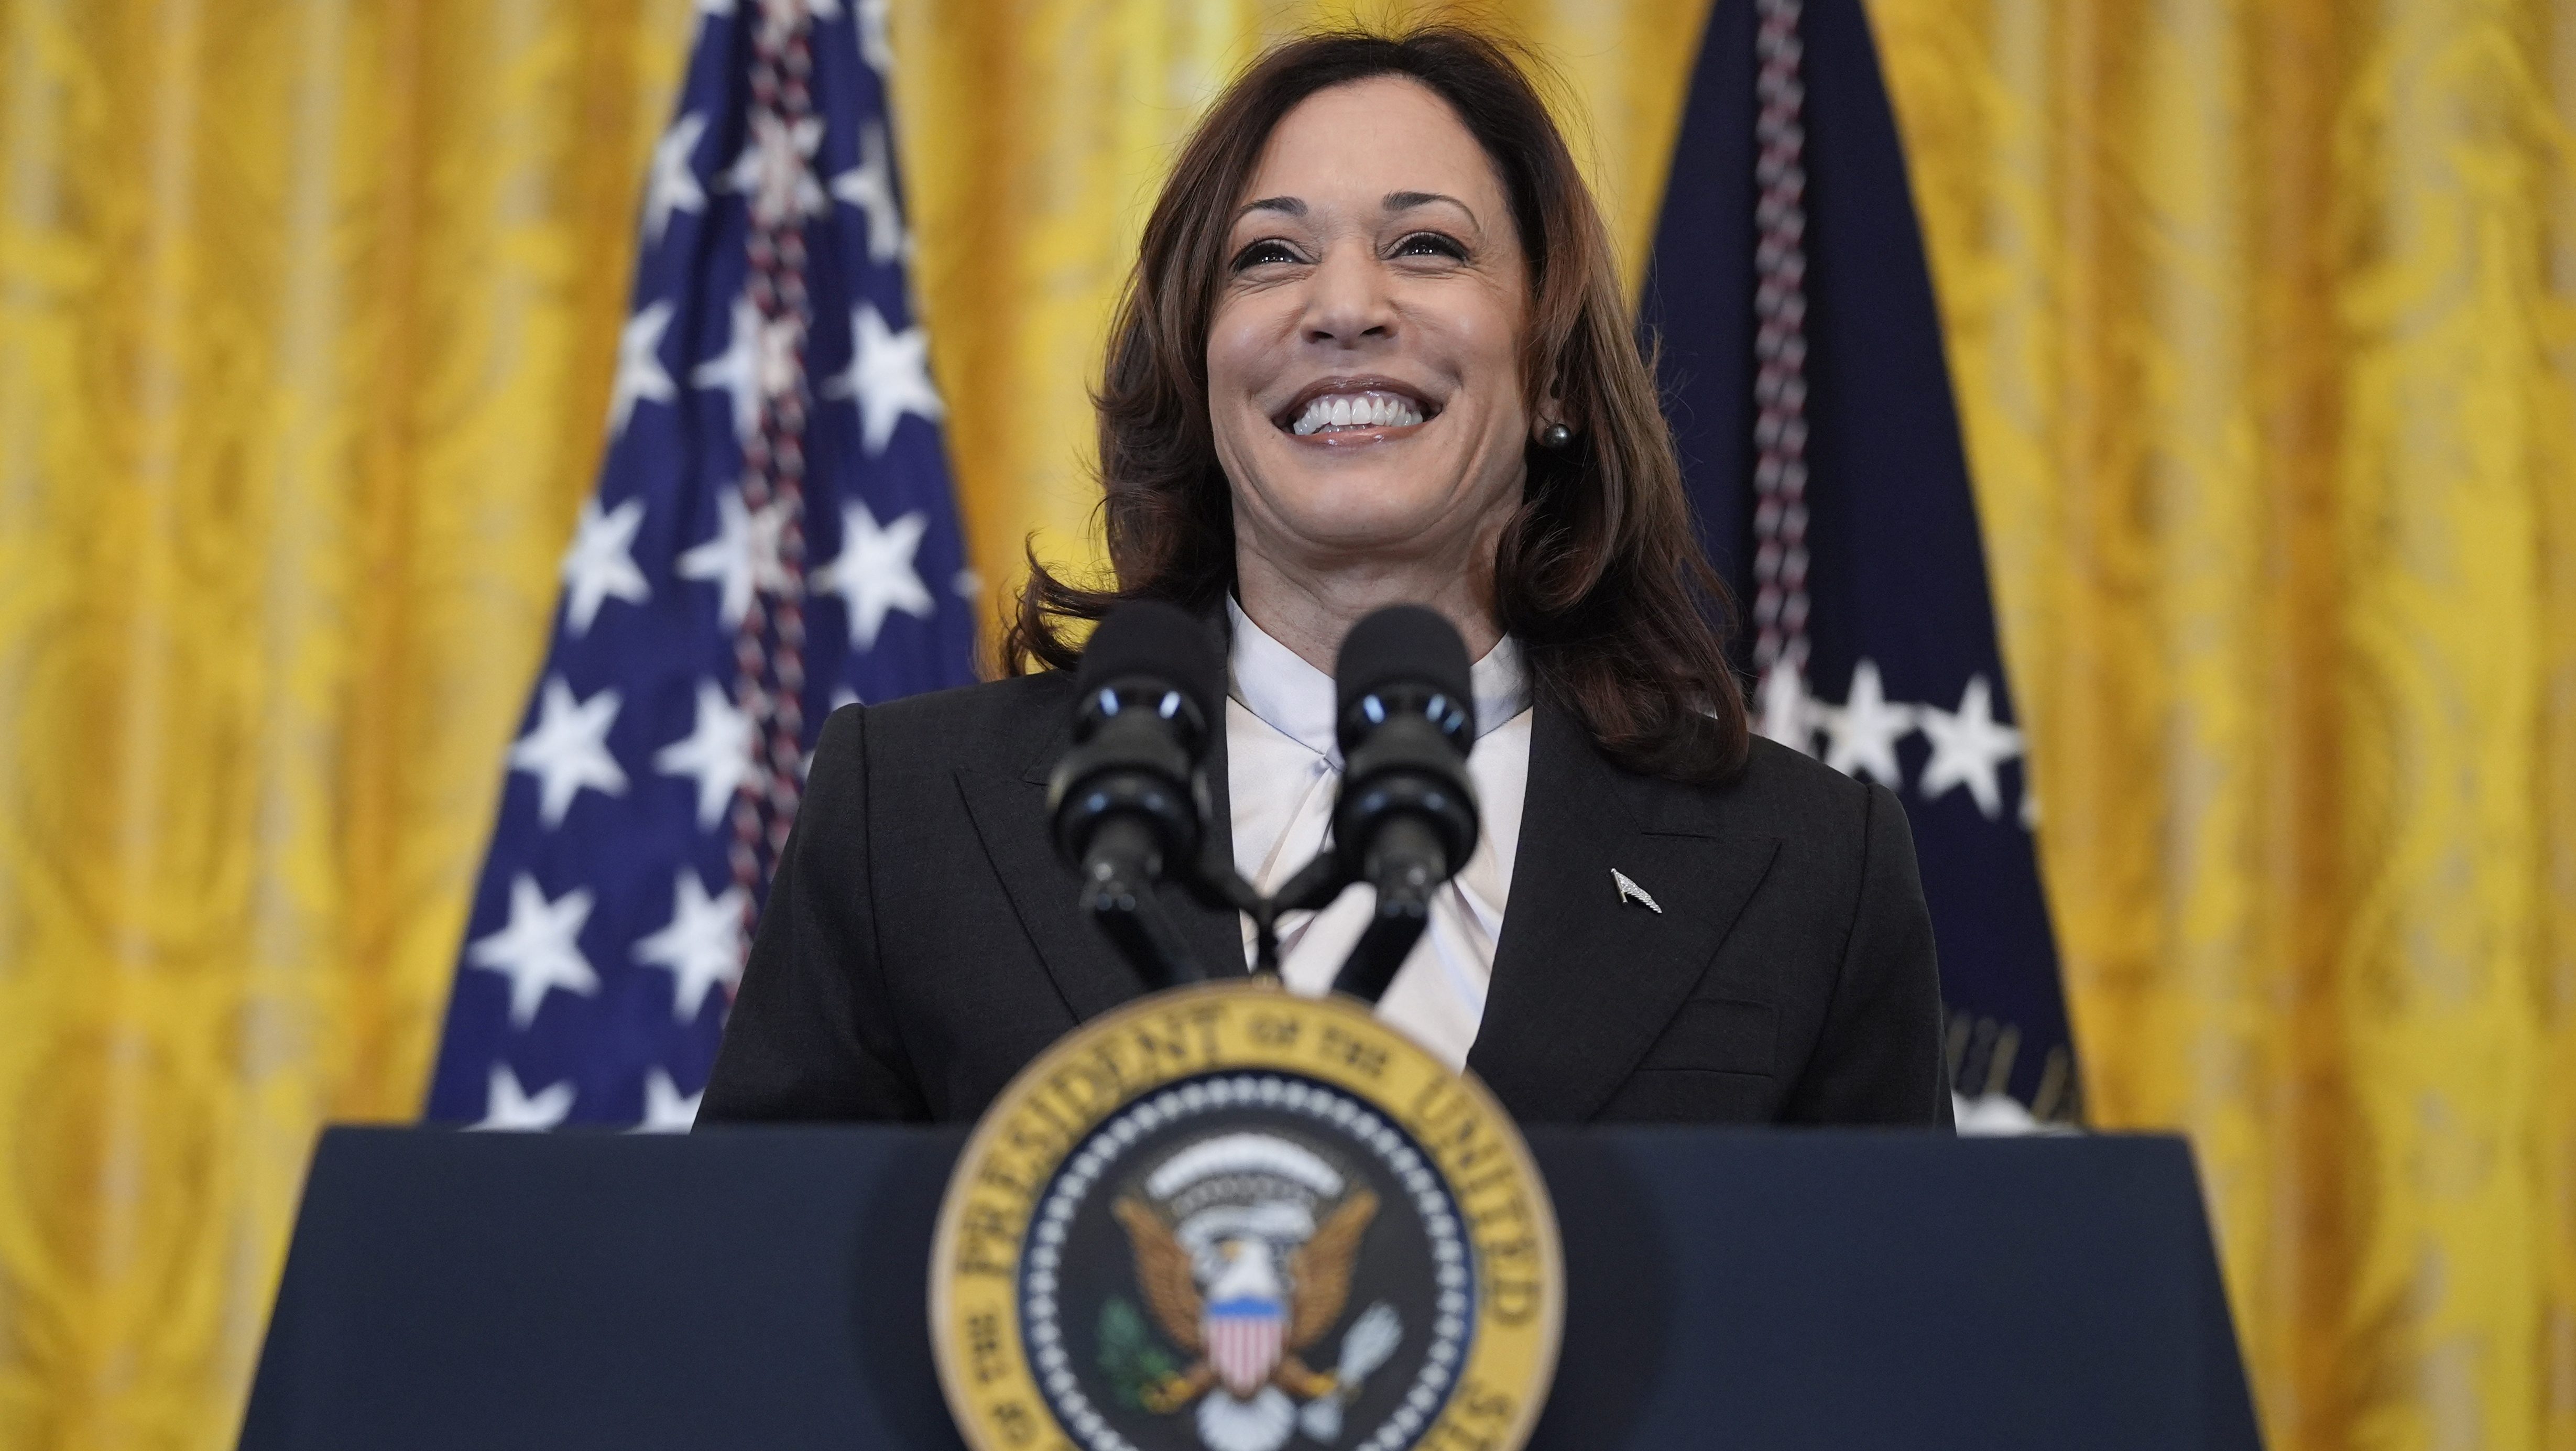 Kamala Harris could become the first Black woman to head a major party's presidential ticket